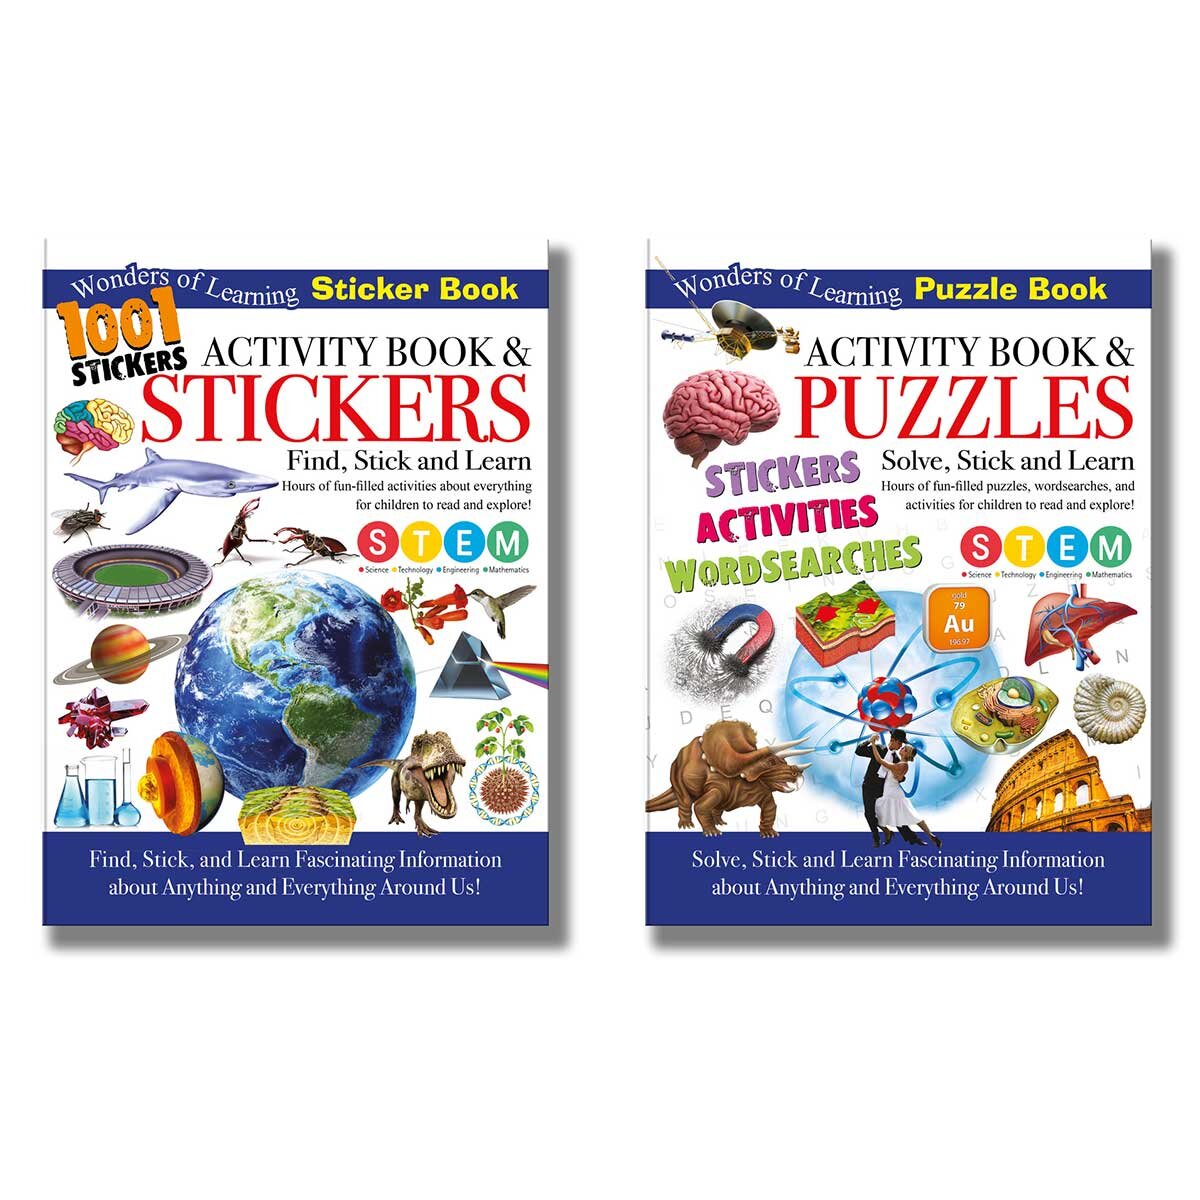 Wonders of Learning Activity Book in 2 Options: Stickers or Puzzles